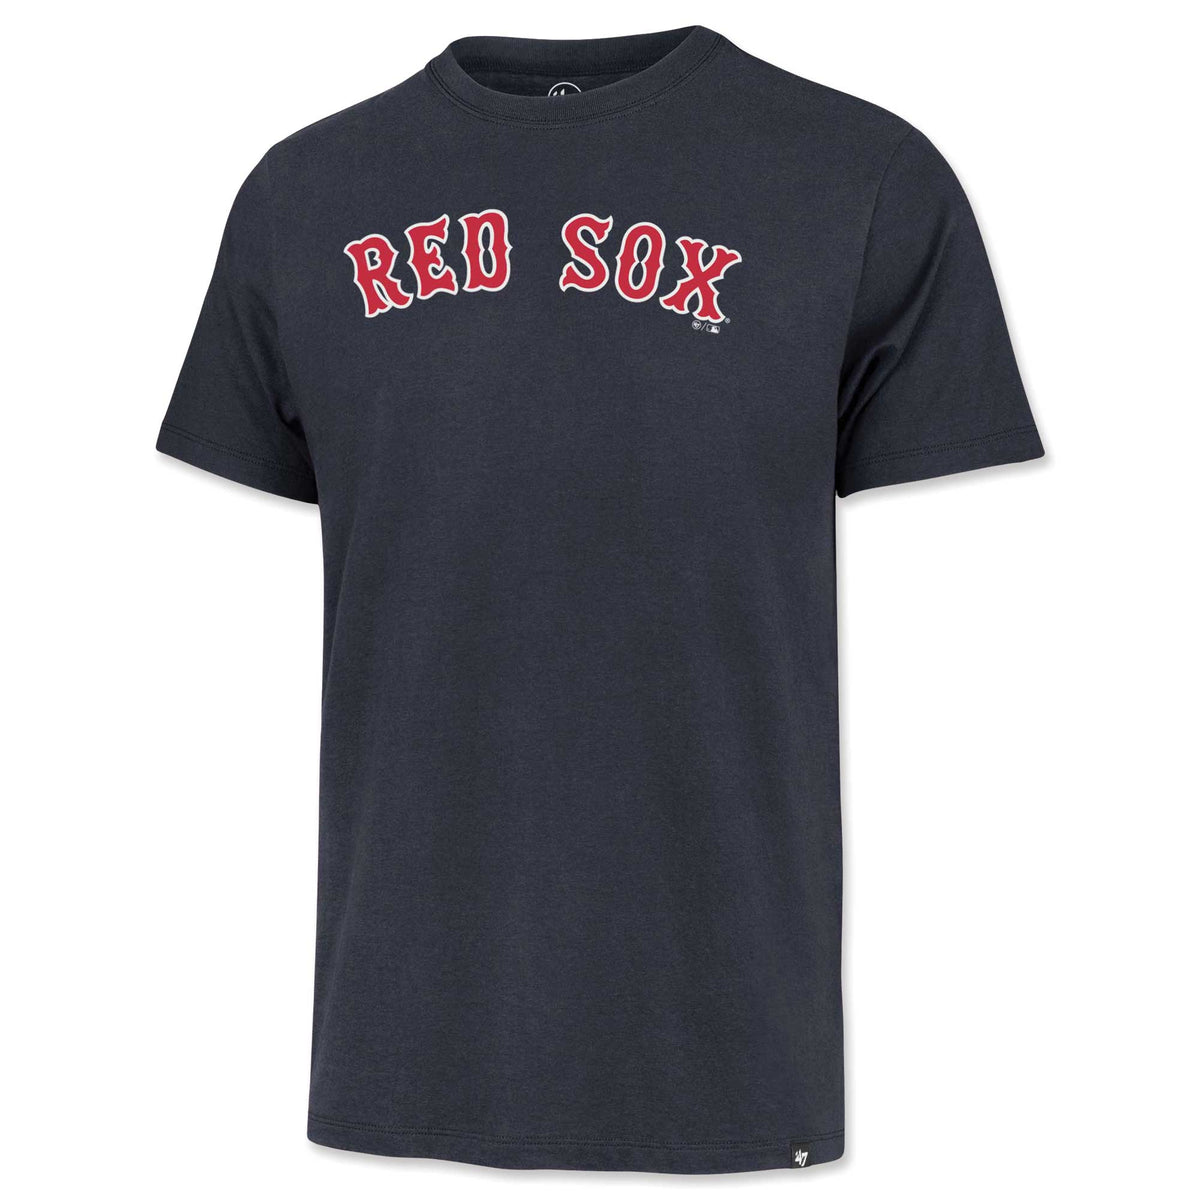 Boston Red Sox RED SOX PRIDE 2 sided red T-shirt sz S small